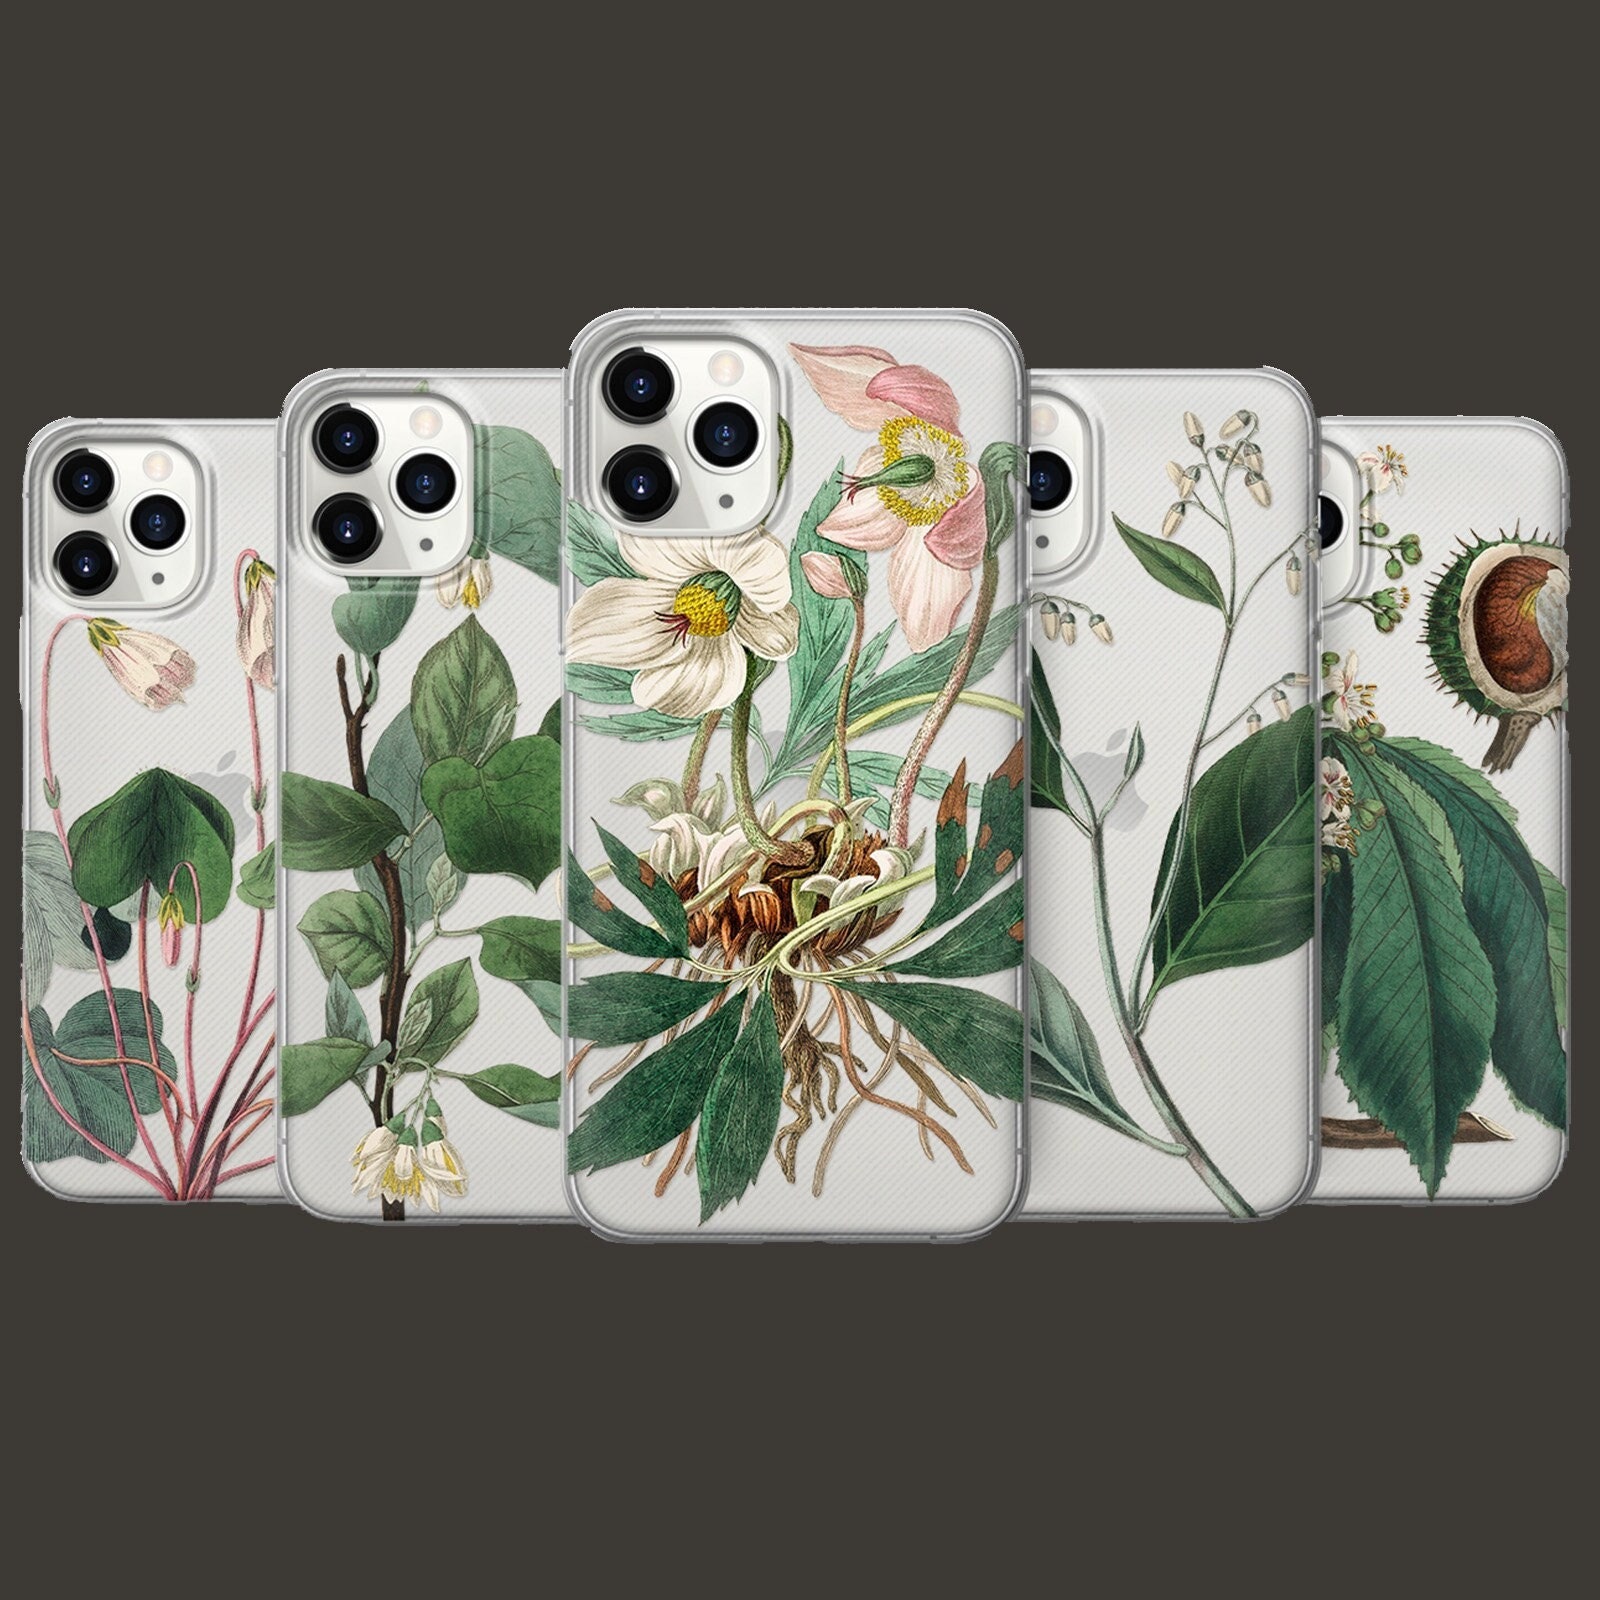 Colorful Phone Cases - Pretty Stone Art Flower iPhone Case